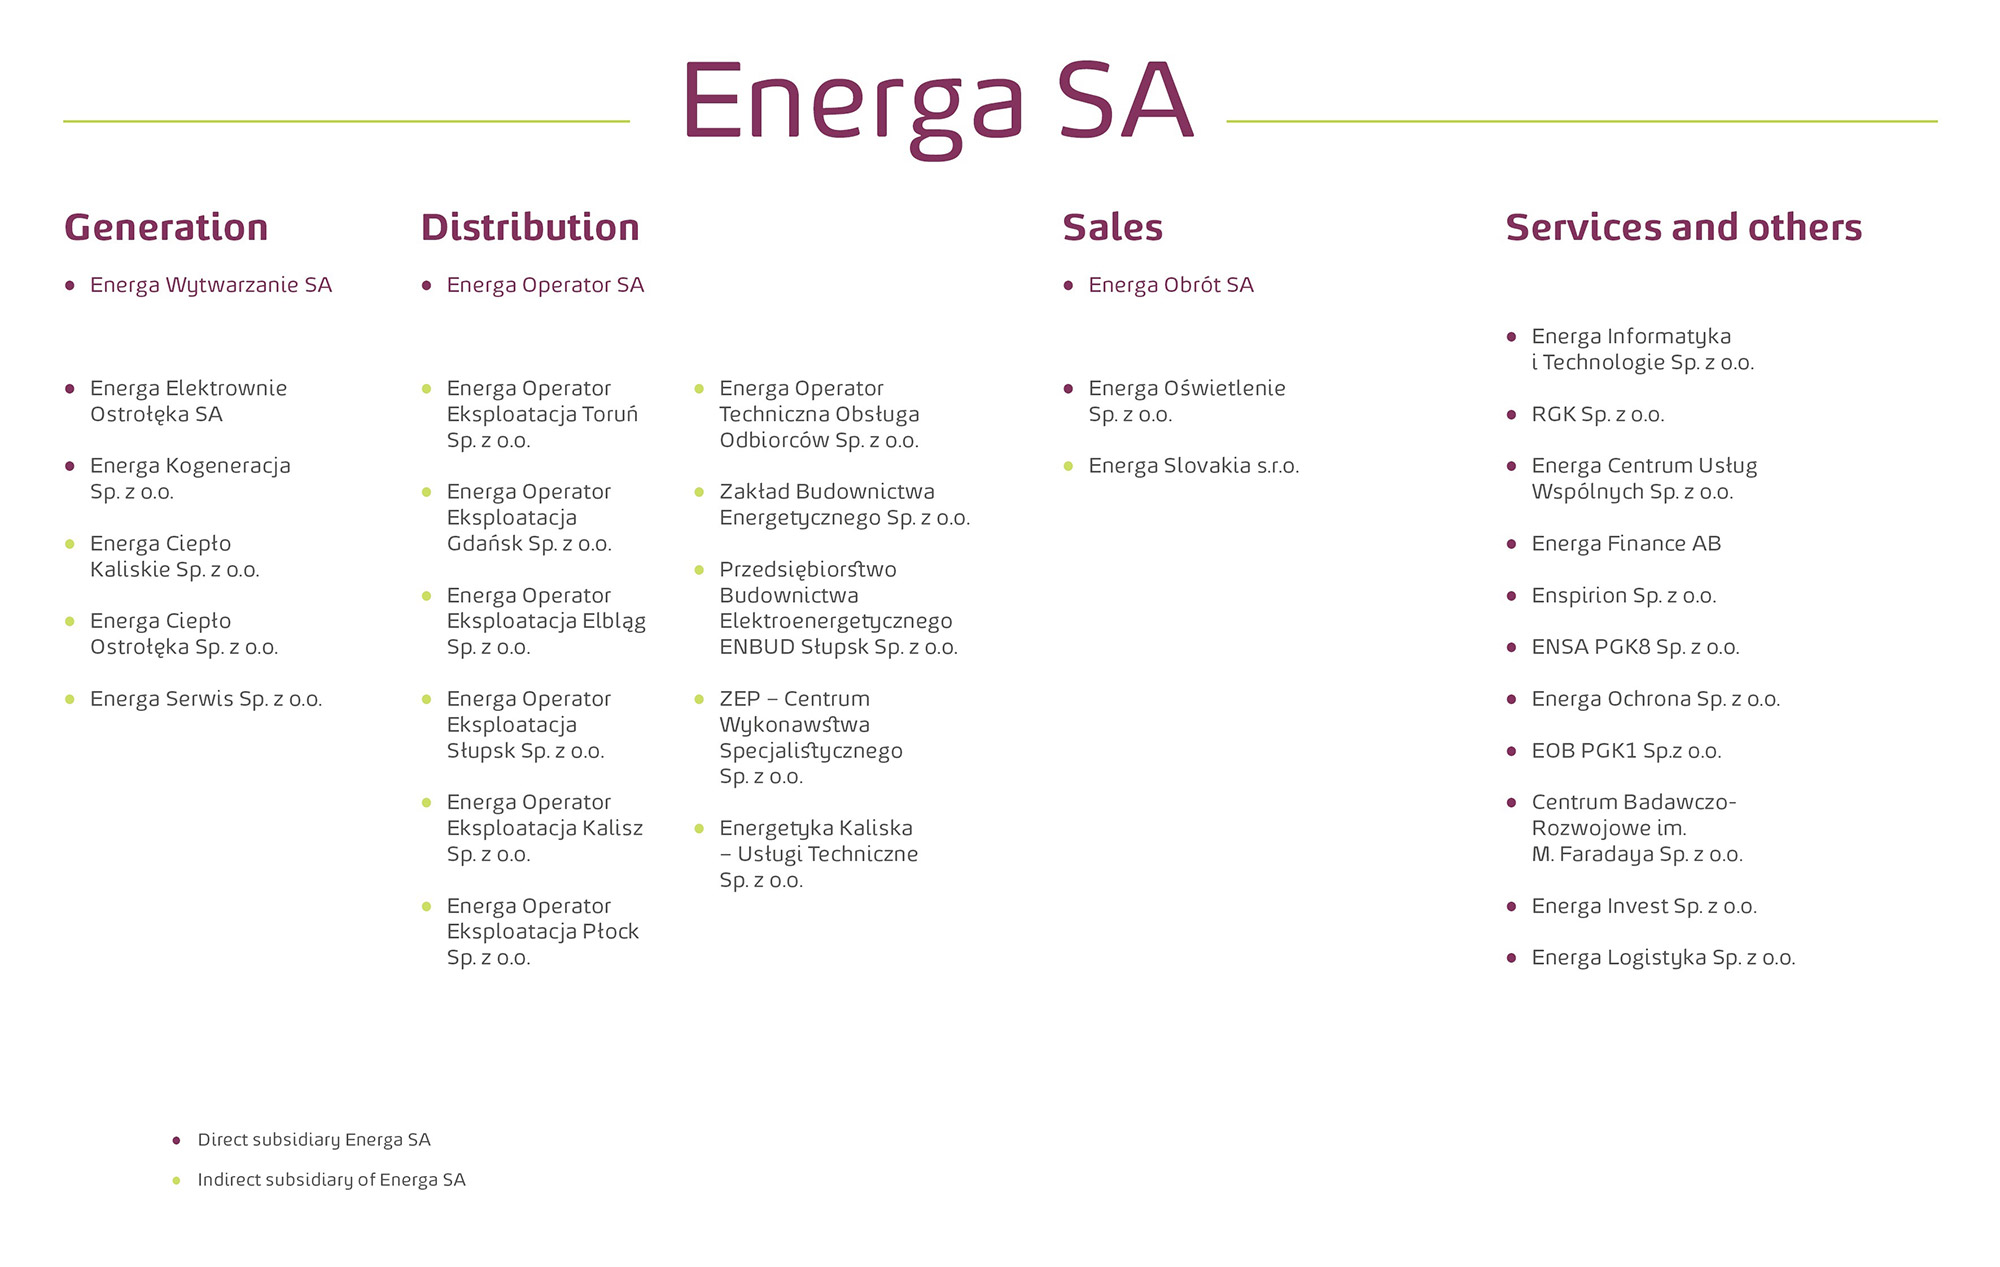 Simplified organizational structure chart of the Energa SA Group as at 31 December 2017